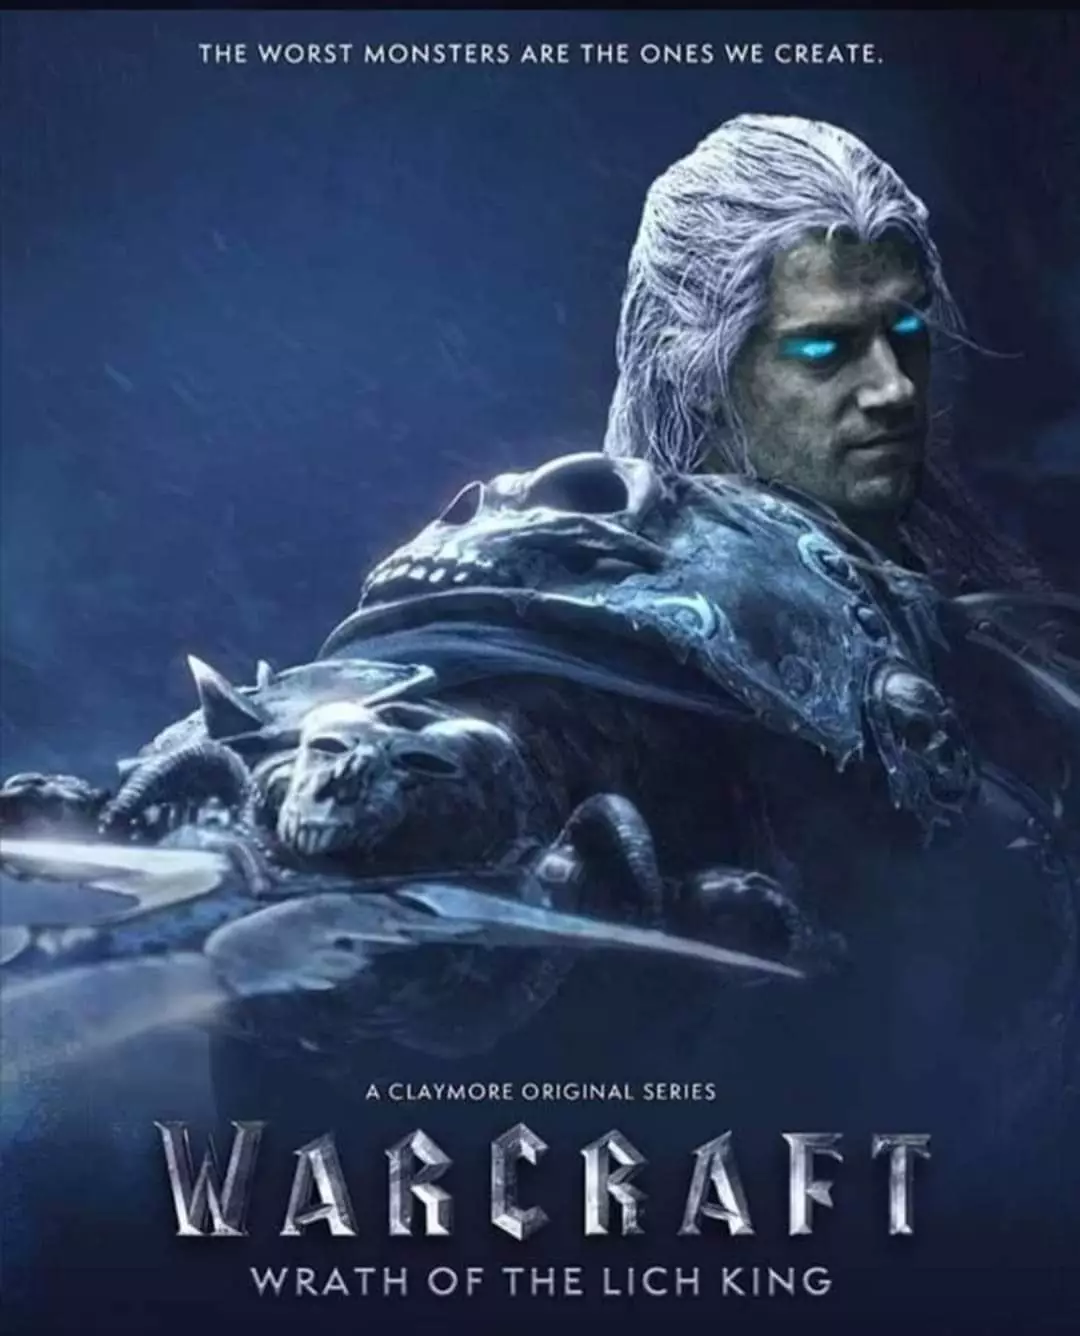 Henry Cavill as the Lich King /